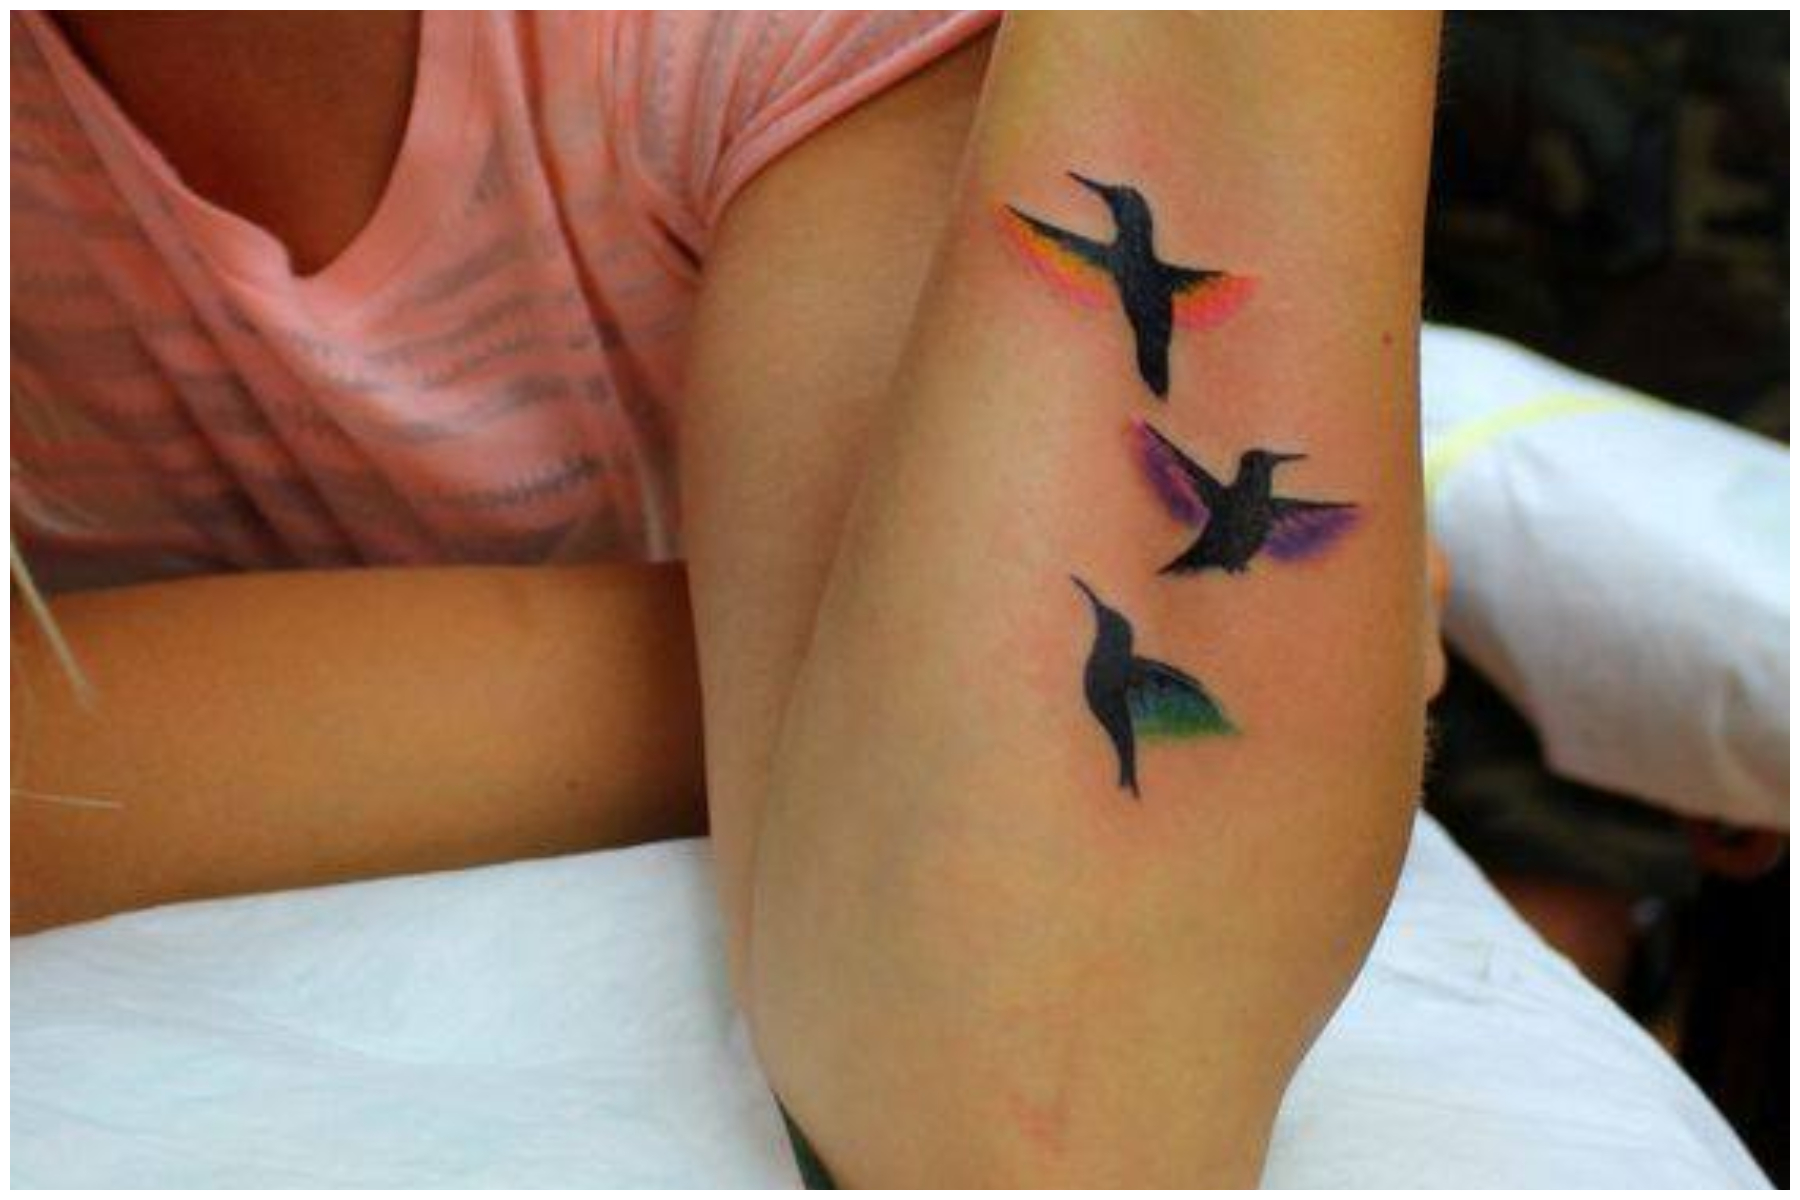 Did you know hummingbirds are the only birds that can fly backwards 🤯 # hummingbird #hummingbirdtattoo #colortattoo #tattoos #aztats #... |  Instagram